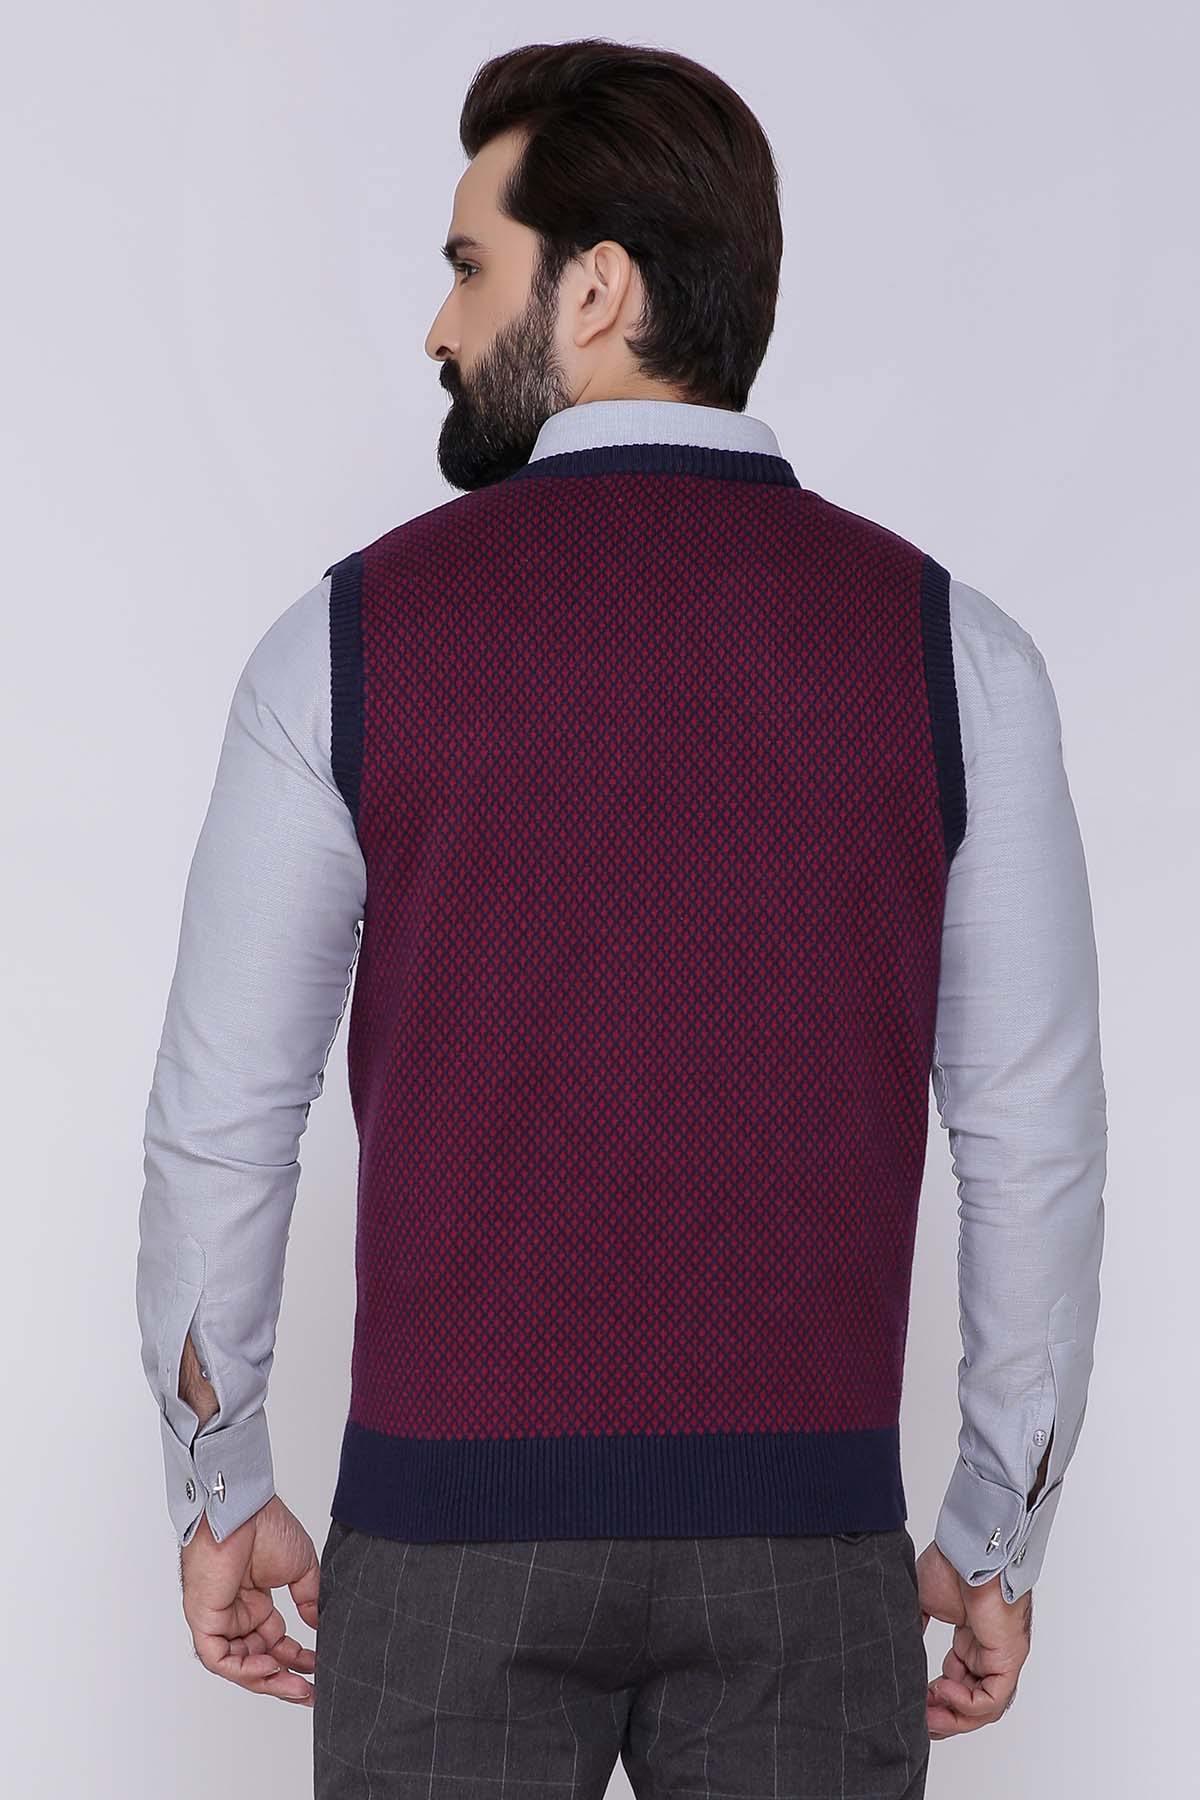 SWEATER V NECK SLEEVE LESS MAROON NAVY at Charcoal Clothing